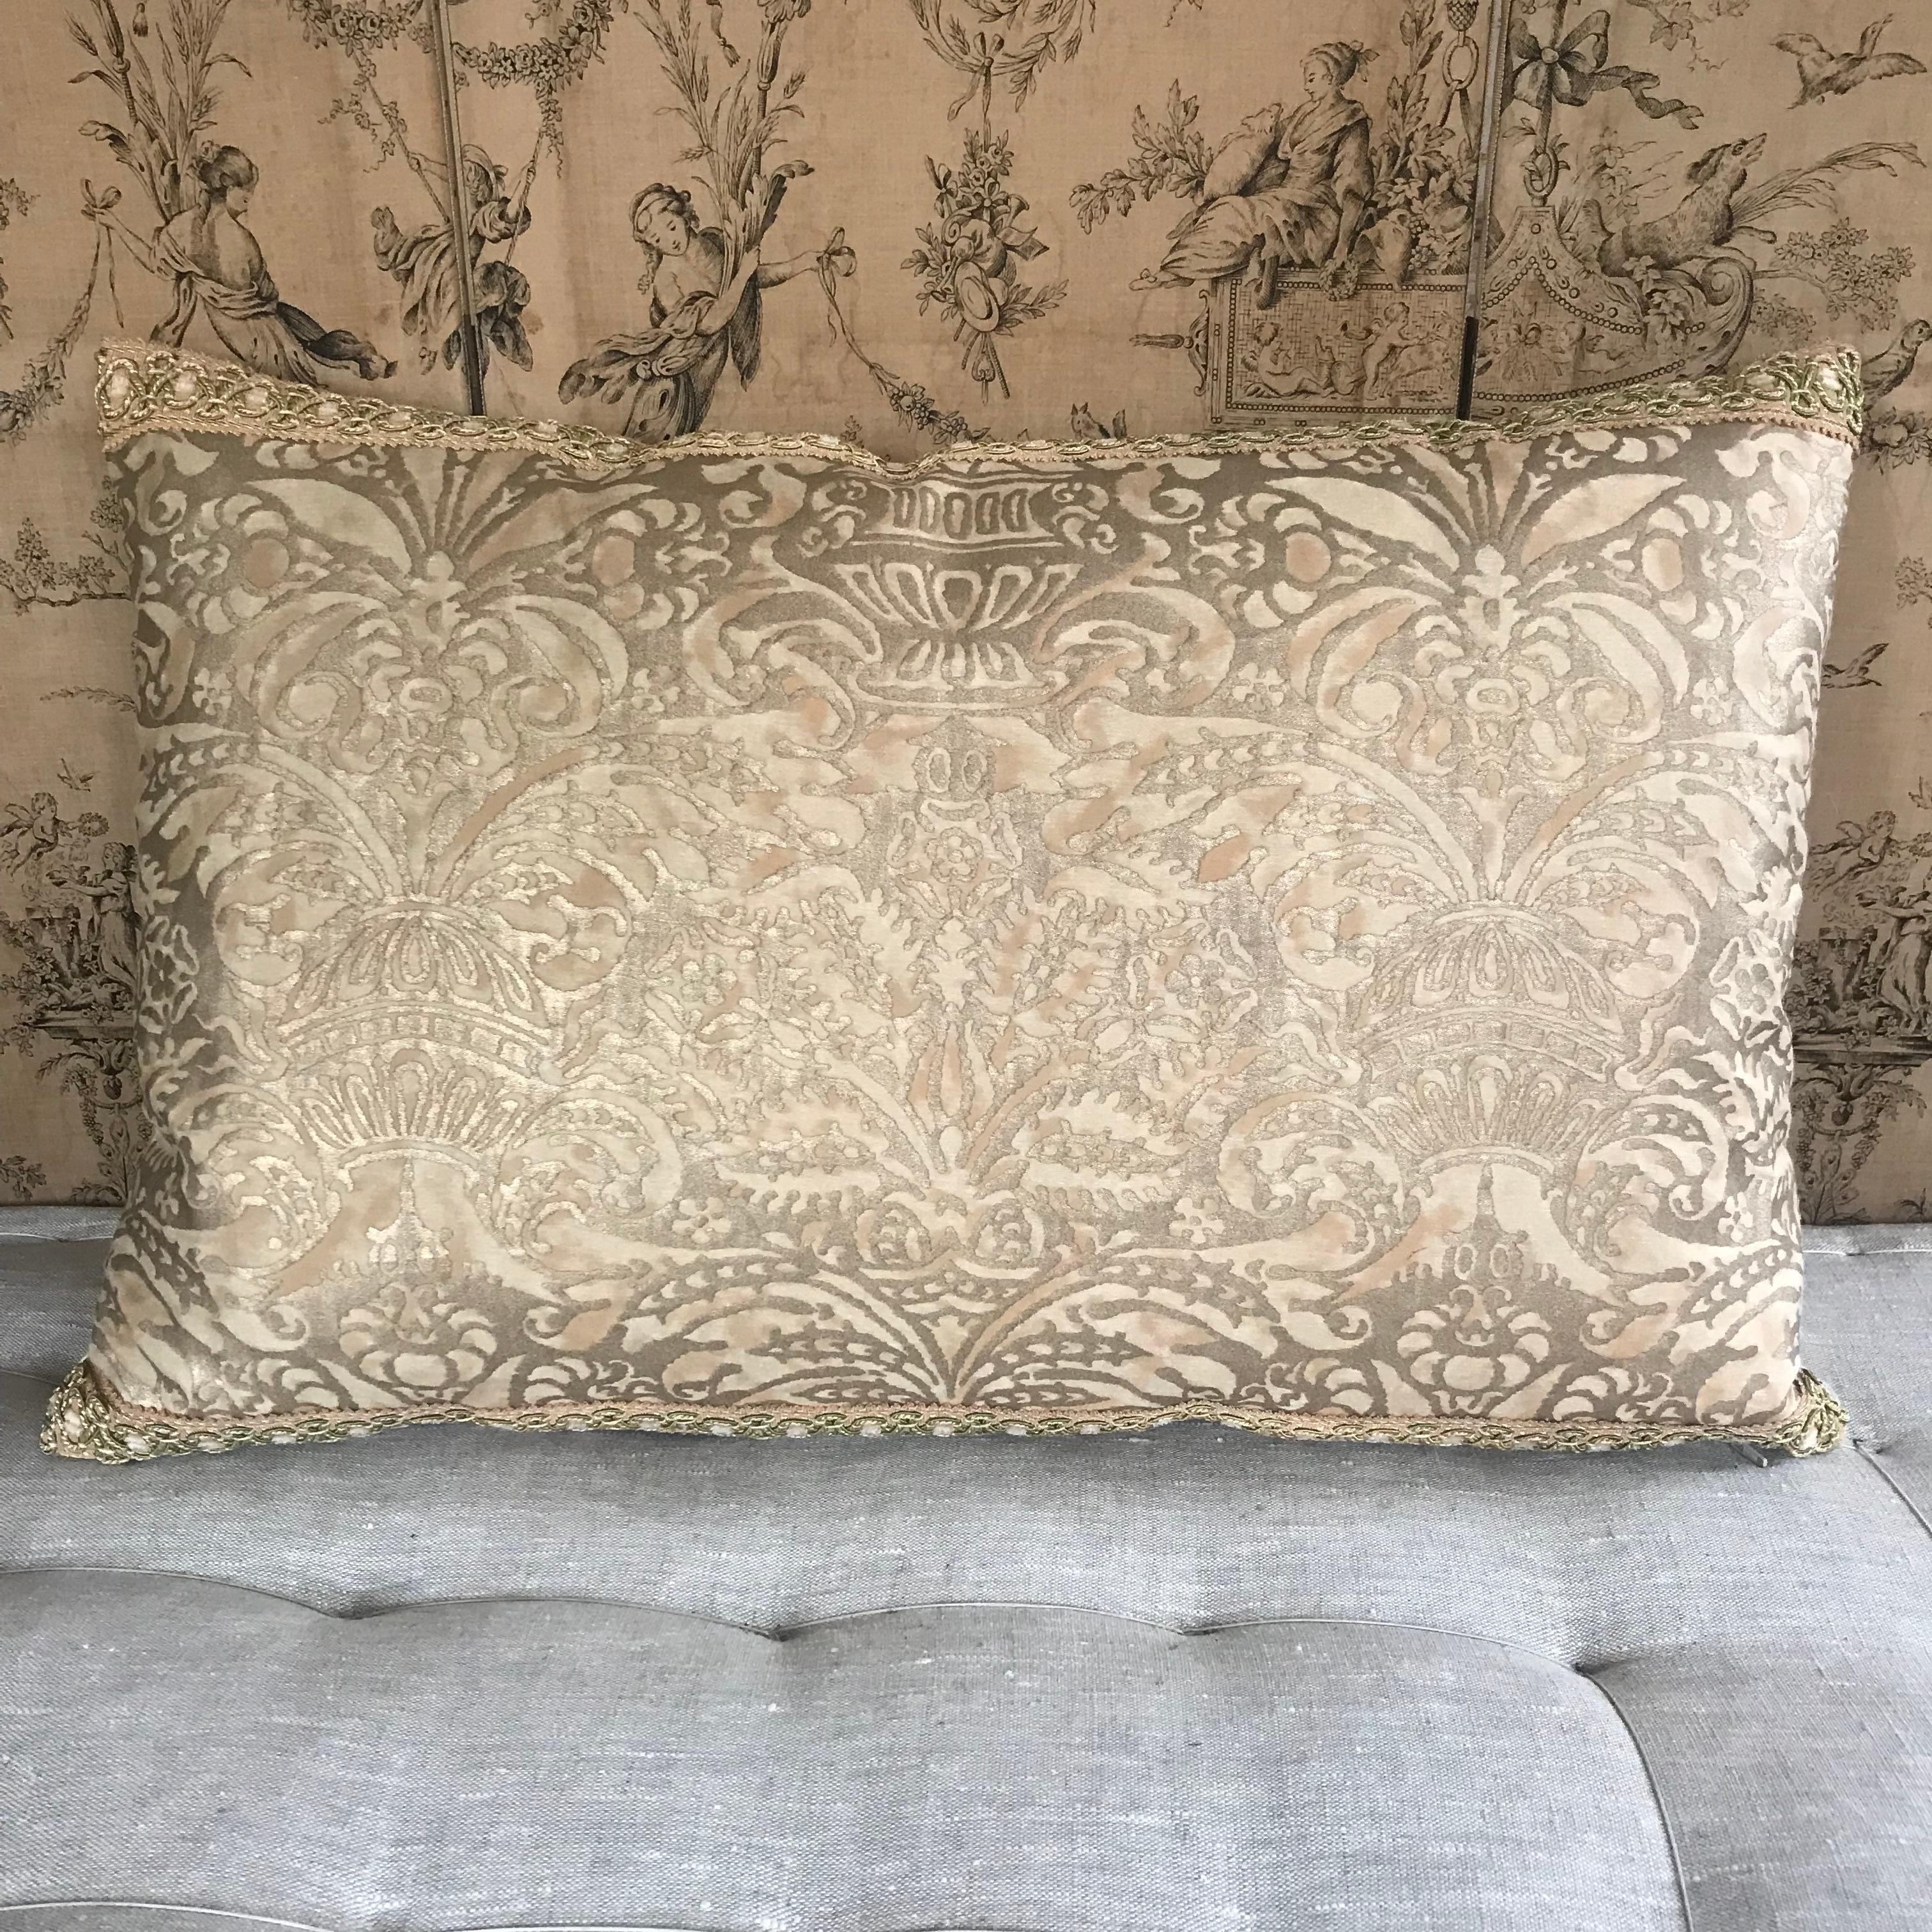 One large pillow shaped cushion made from vintage Fortuny fabric - this is the Campanella design in apricot and silvery gold - one of the prettiest of the Fortuny designs and colour ways I think 
I have laid it onto honey coloured vintage silk 
-